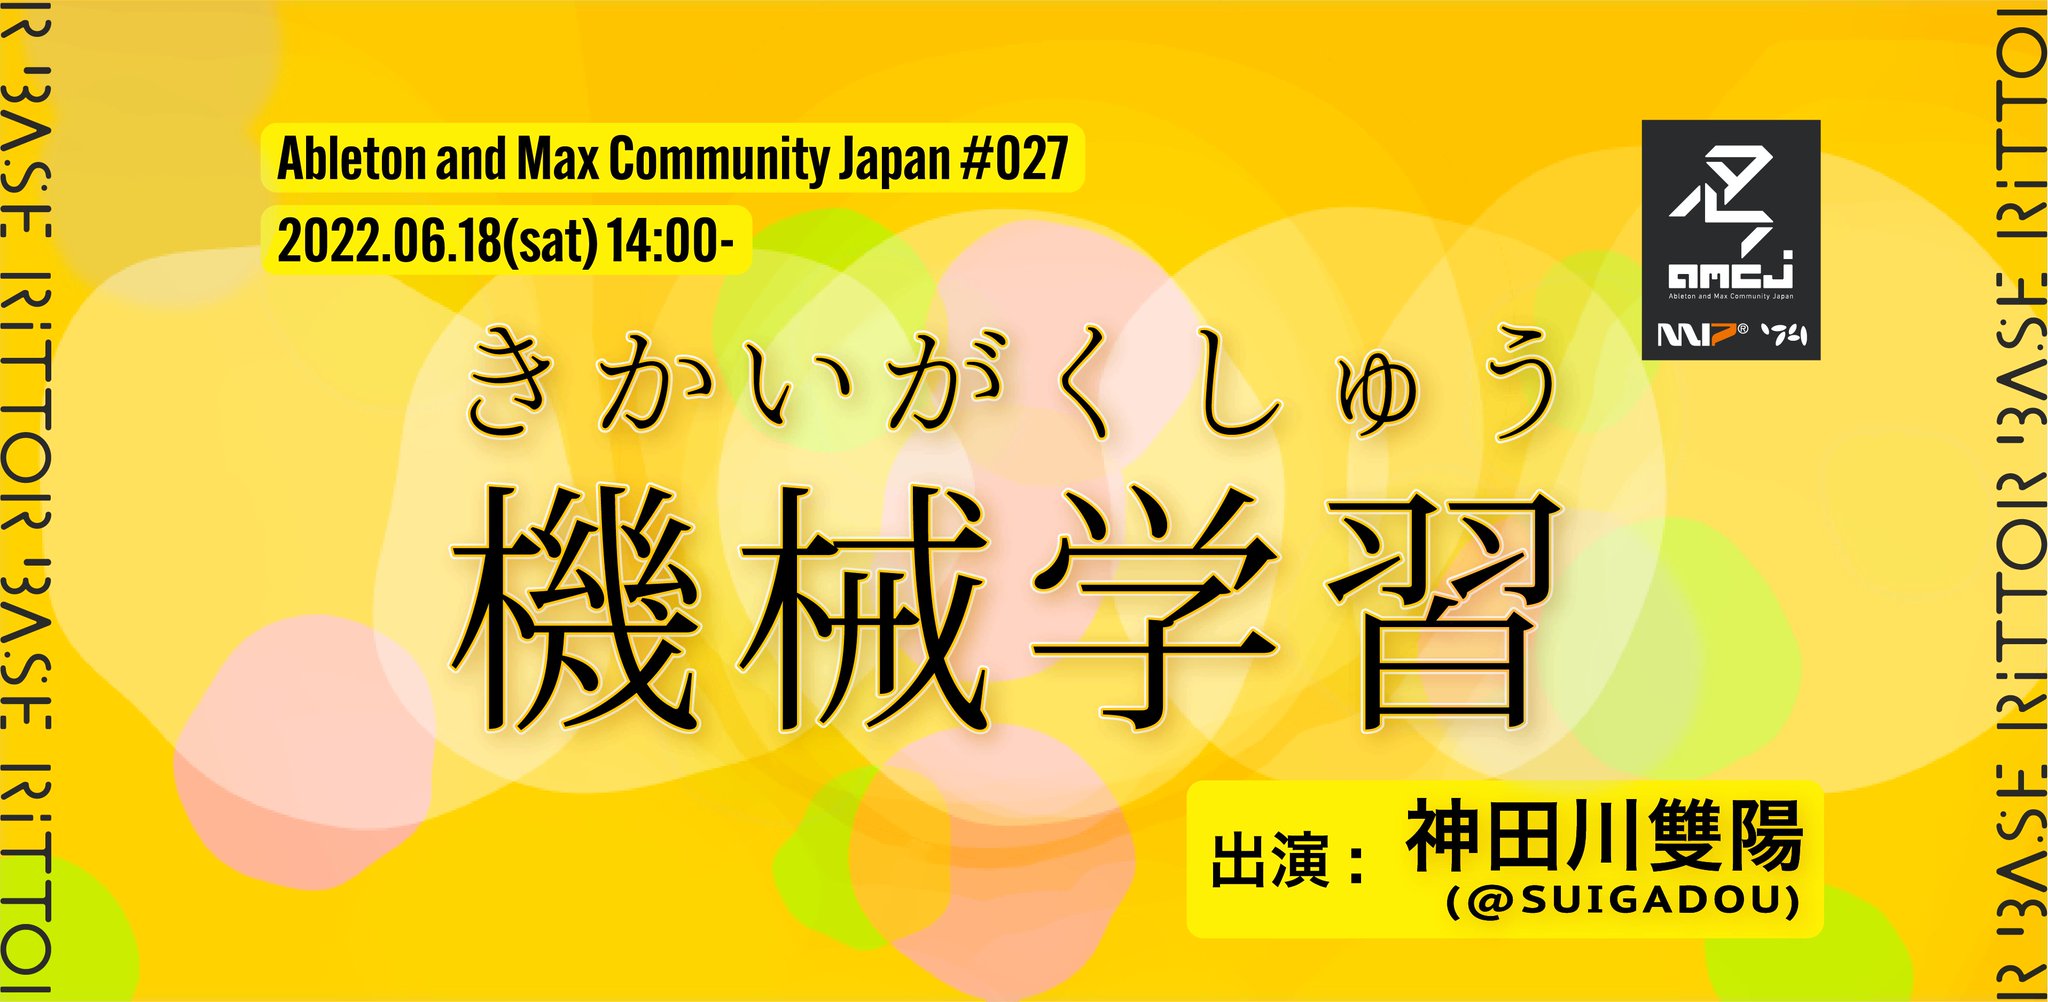 Ableton and Max Community Japan #027「機械学習」 - 御茶ノ水RITTOR BASE